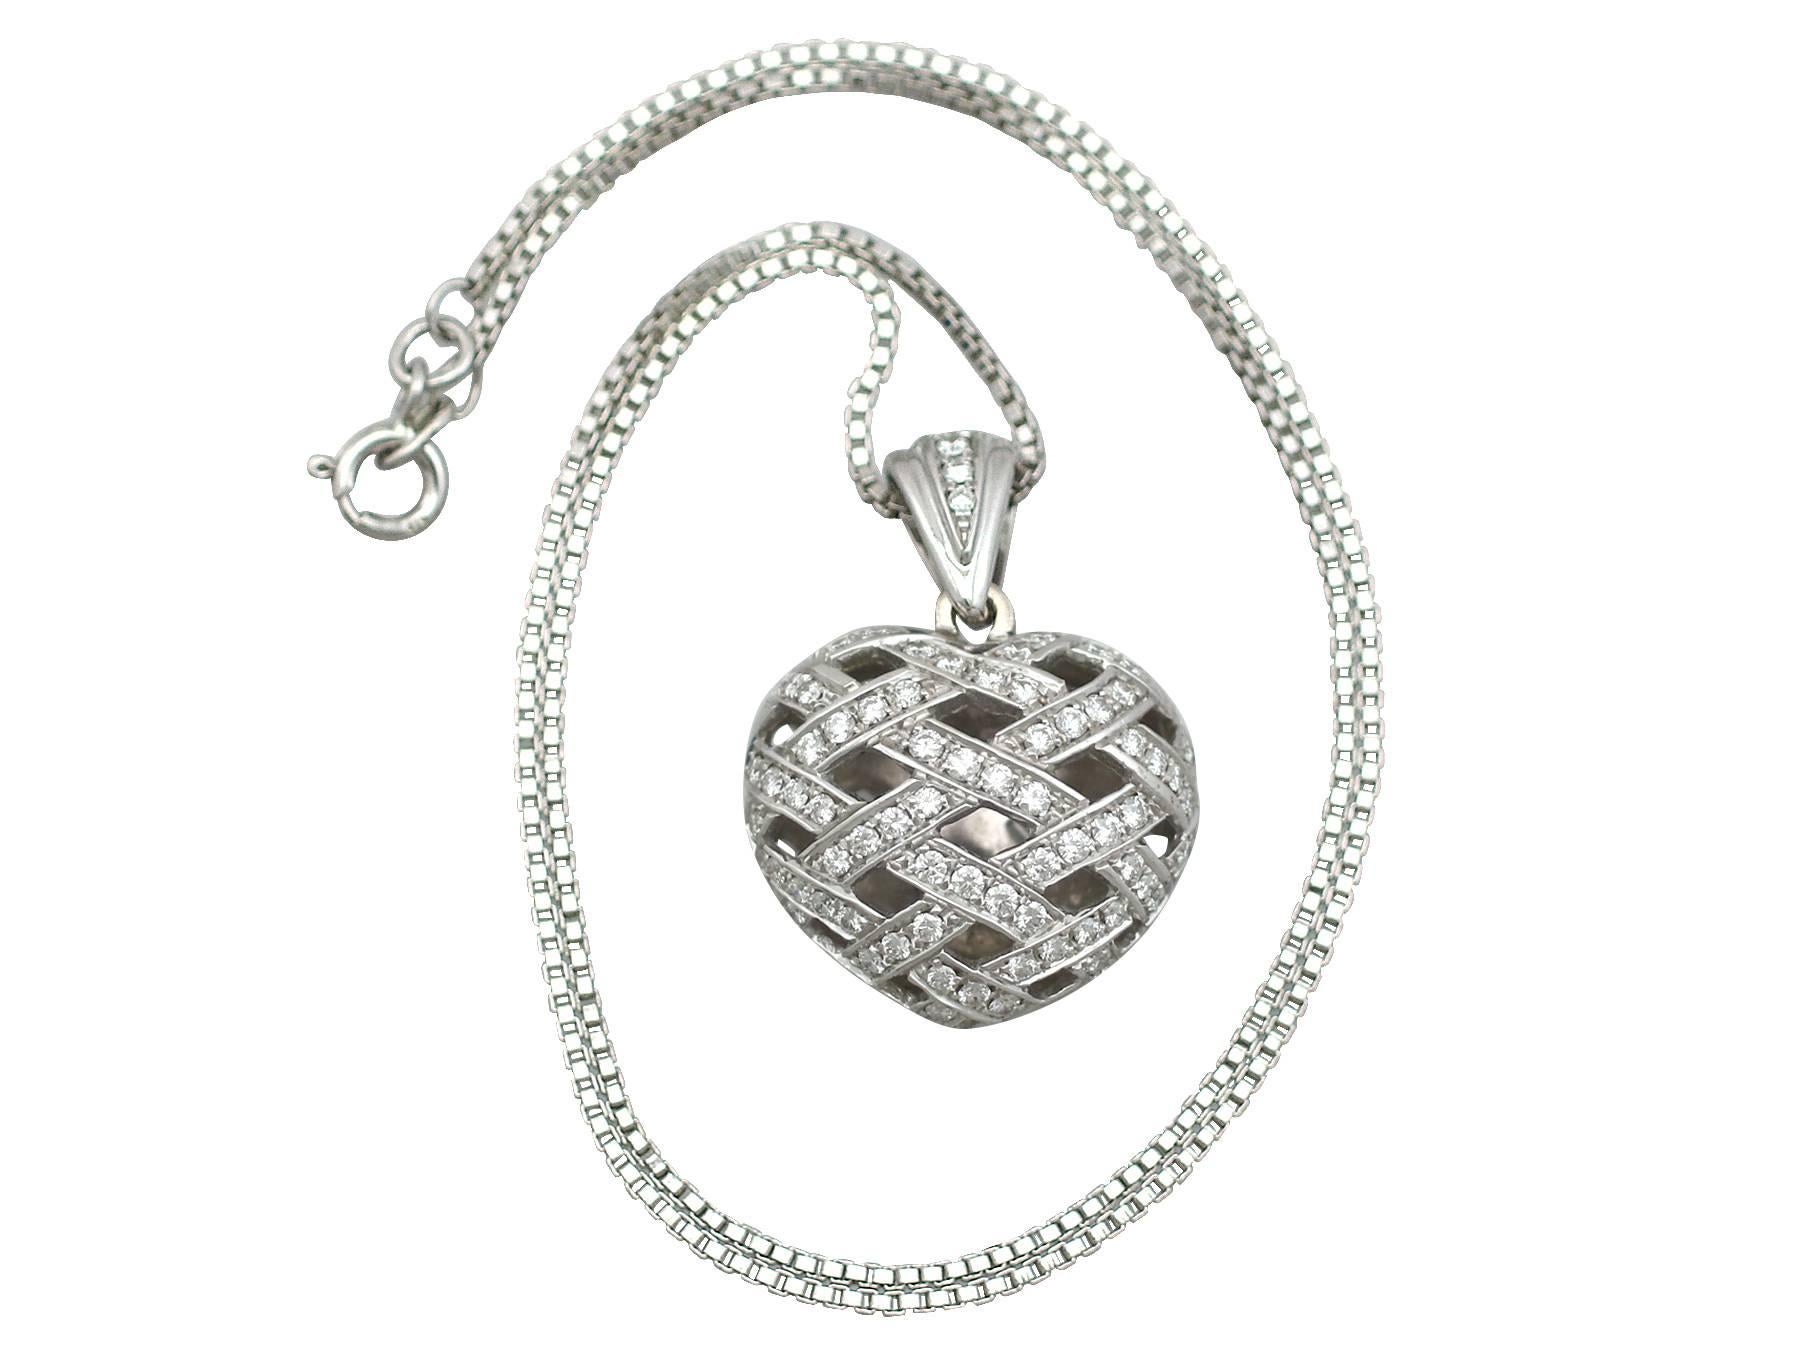 An impressive vintage 1.35 carat diamond and 18 karat white gold heart shaped pendant; part of our diverse antique jewelry and estate jewelry collections

This fine and impressive diamond heart pendant has been crafted in 18k white gold.

The